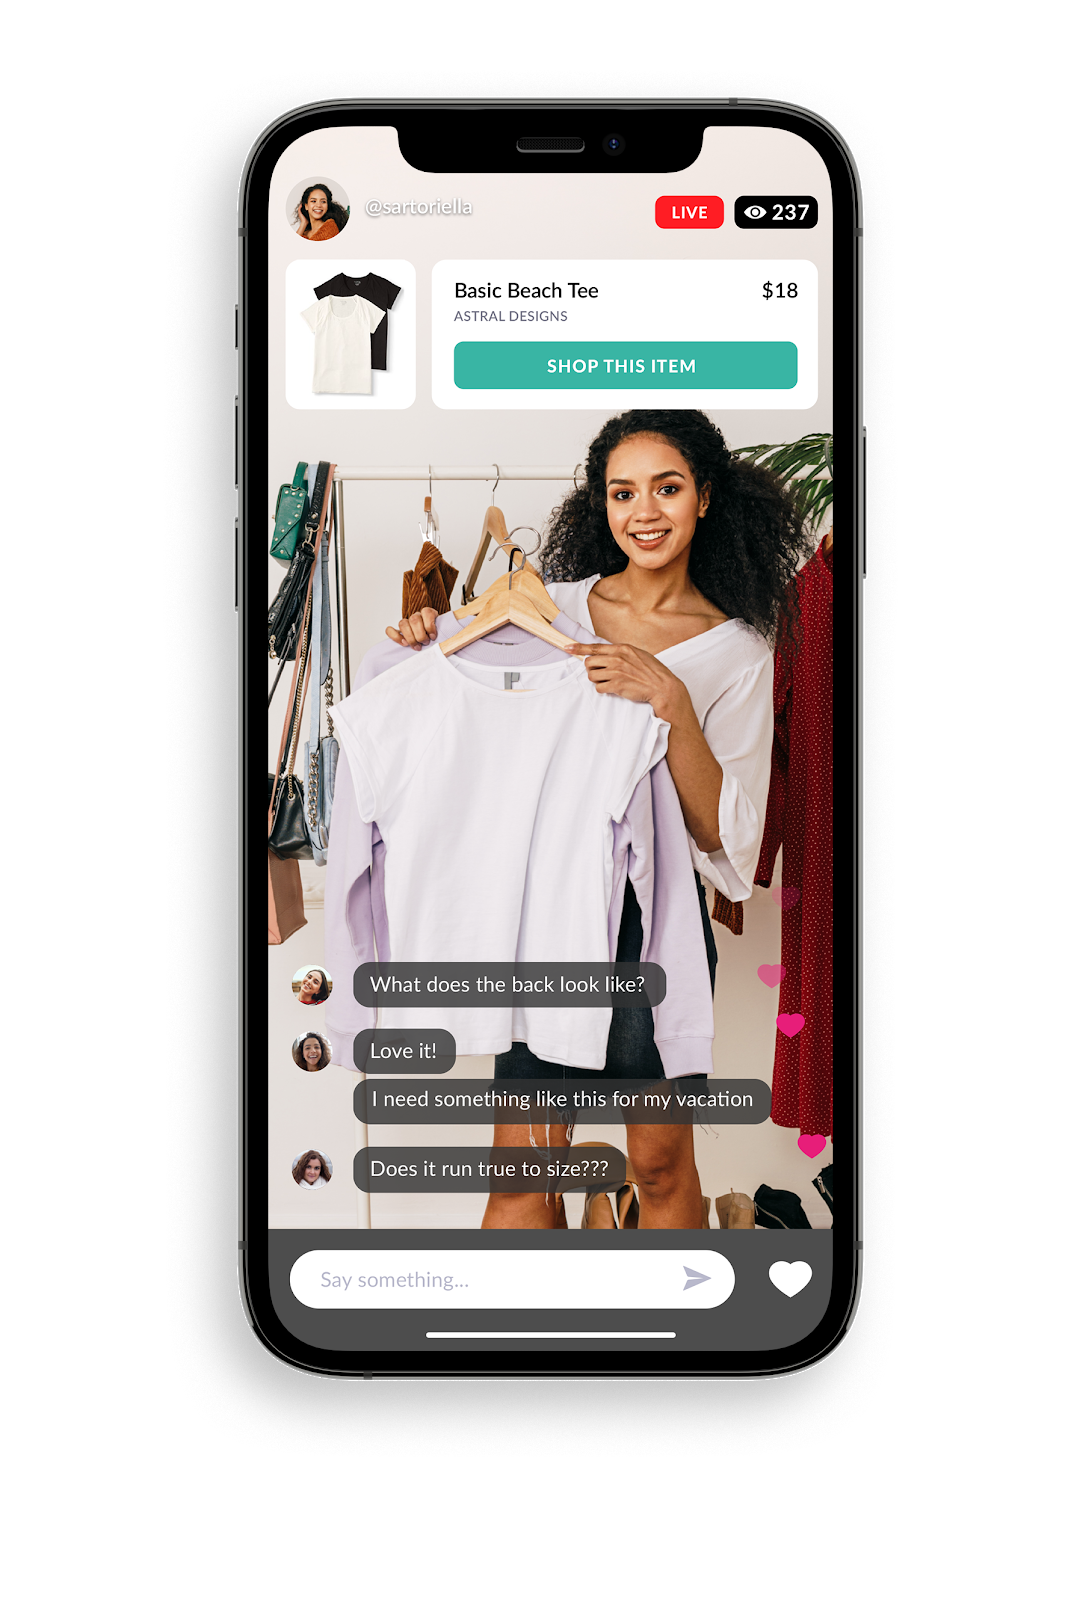 Leverage Zoom’s interactive features to create unique shopping experiences